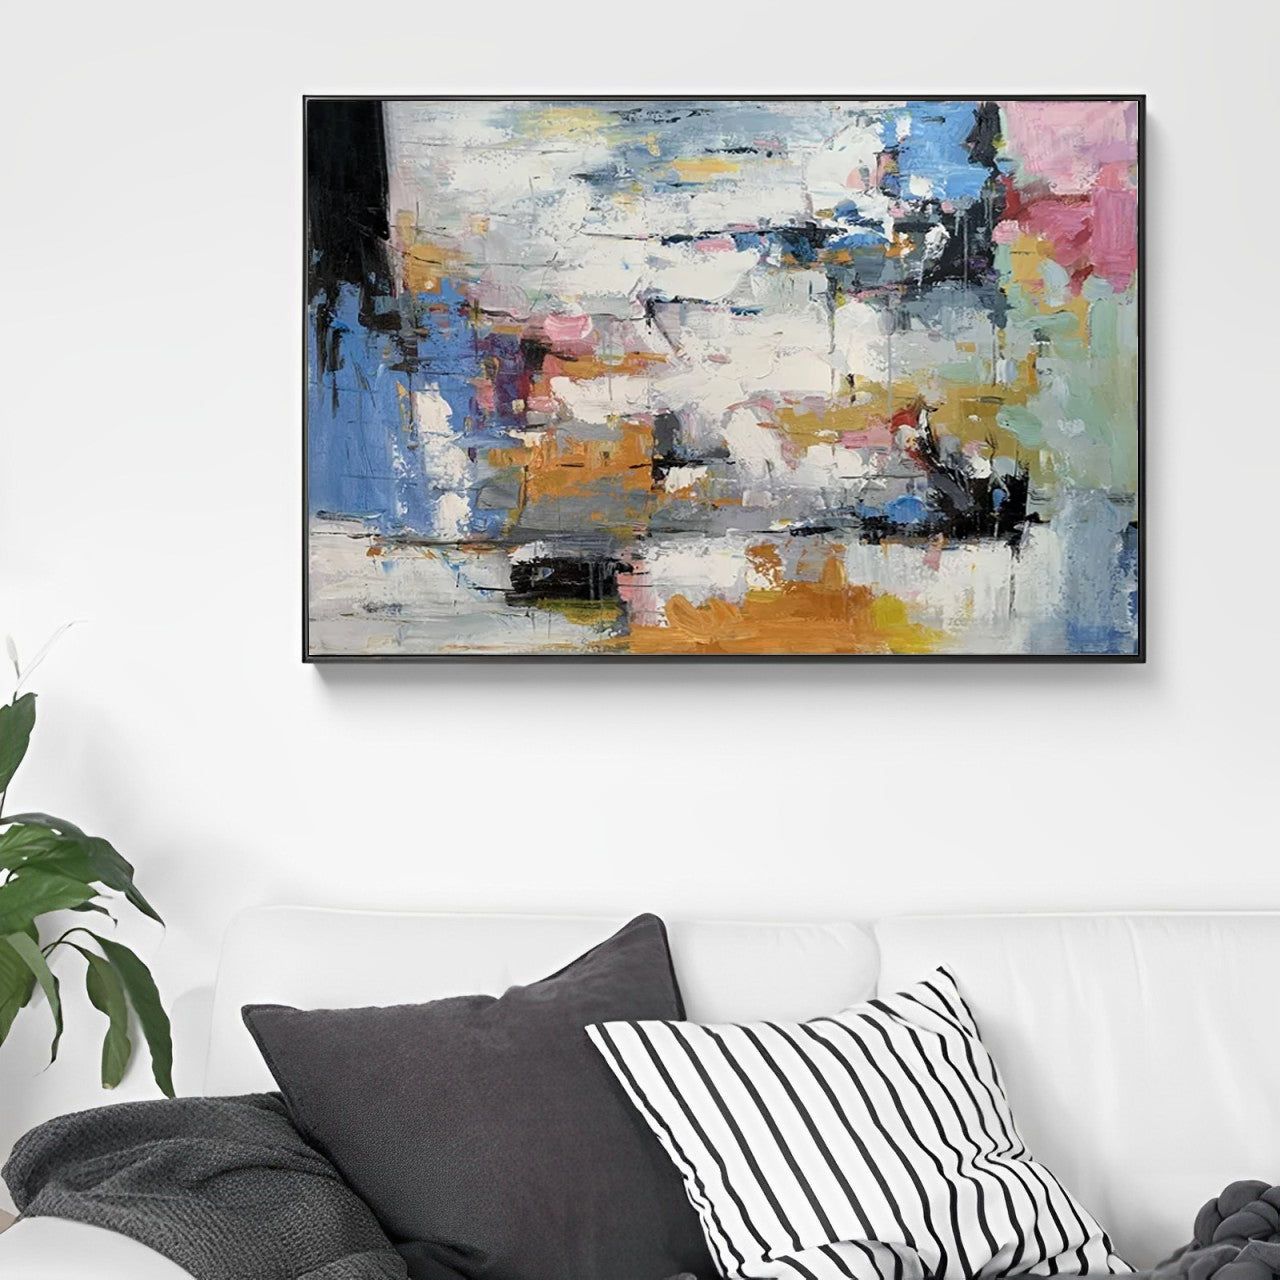 Shivering - Large Abstract Colorful Canvas Art Painting